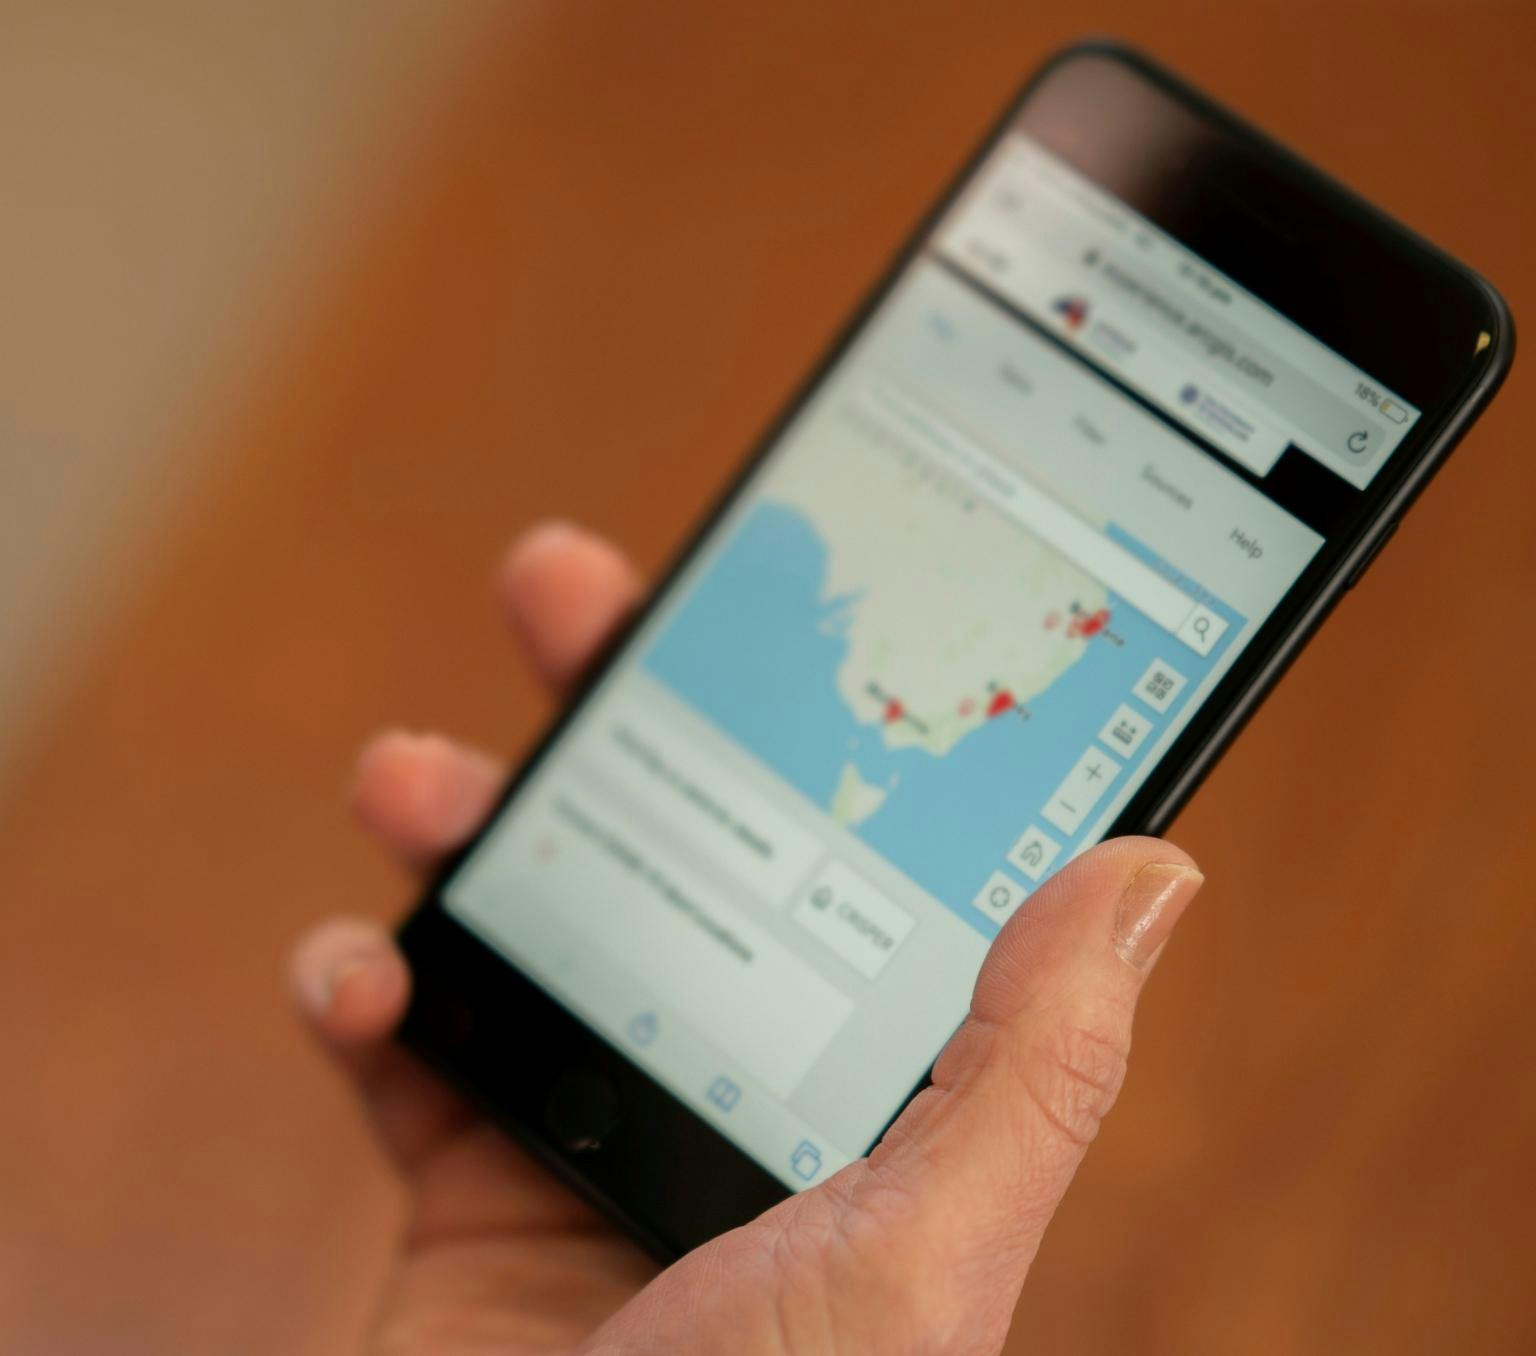 A mobile phone showing a map of Australia with red dots in some locations is held in a the hands of an unidentified person.